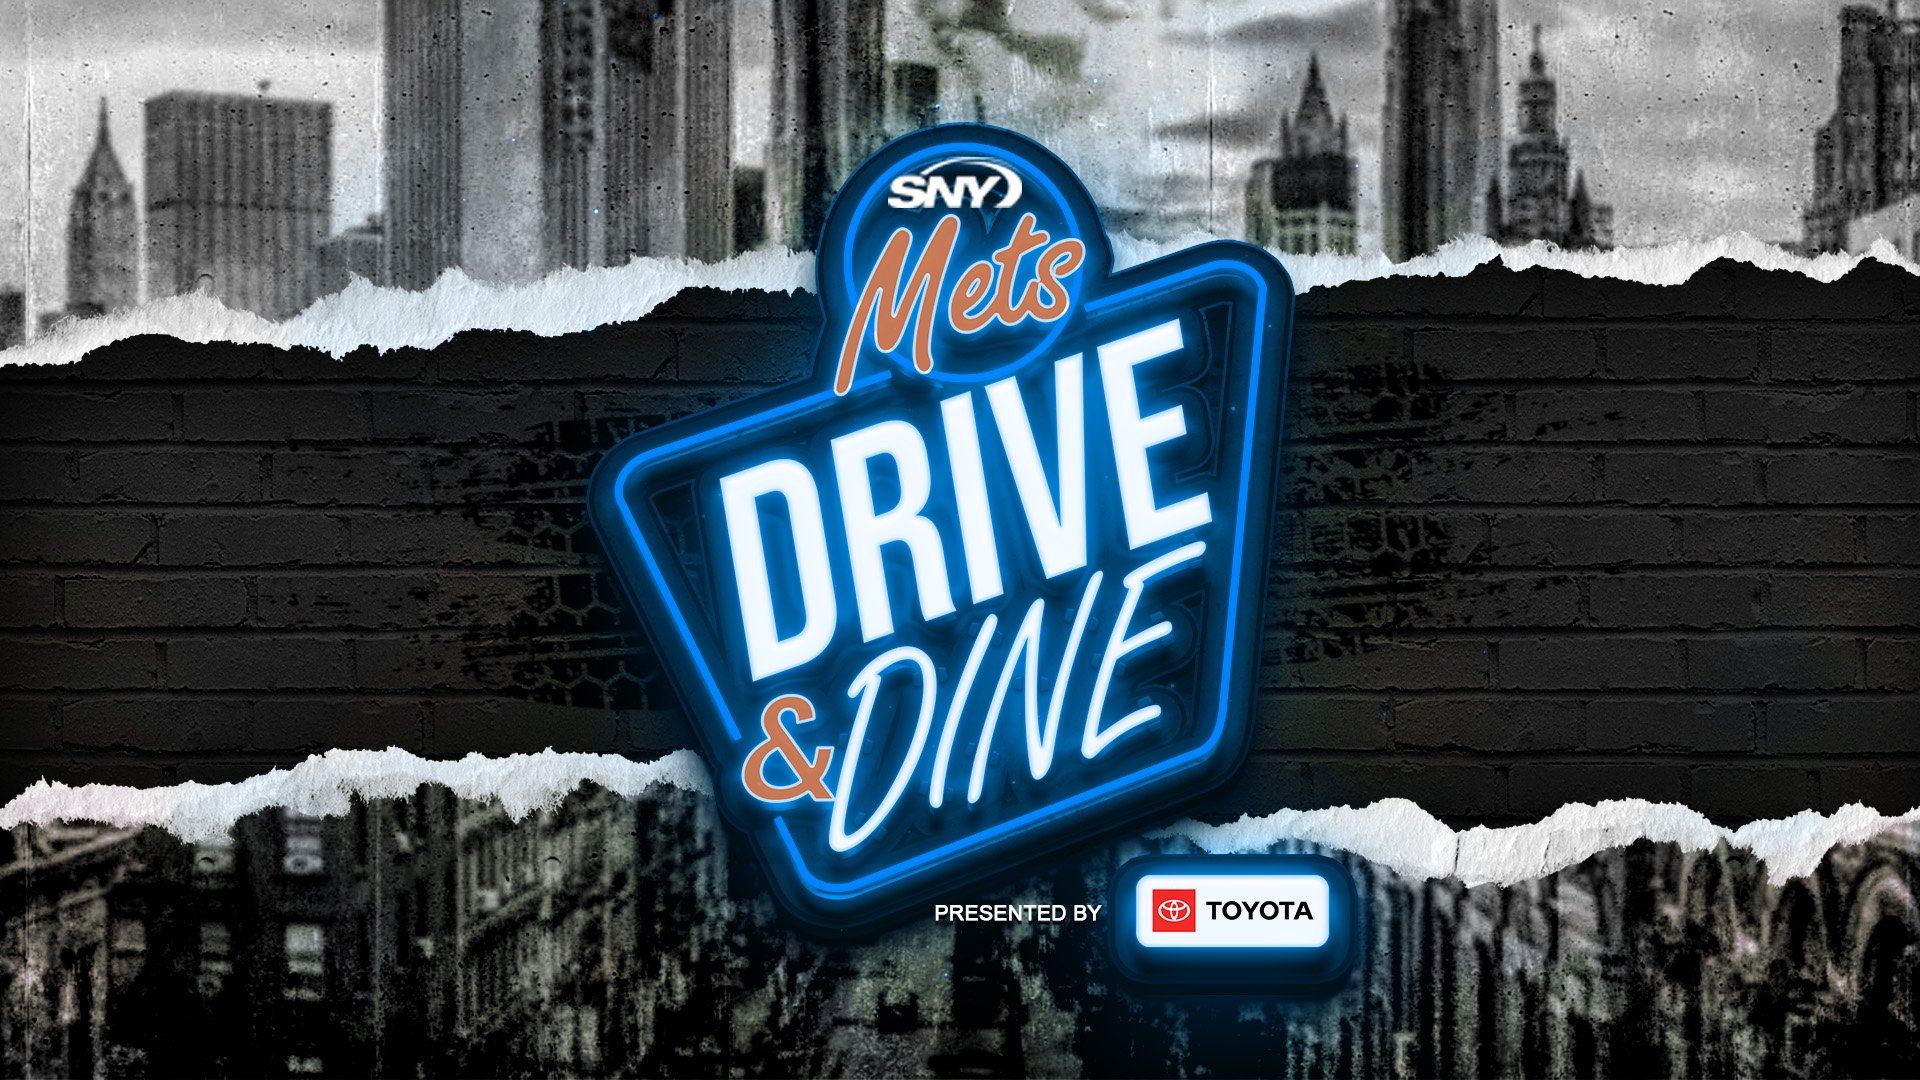 081721-Mets Drive and Dine Logo Lockup-FINAL-presented by-4.jpg